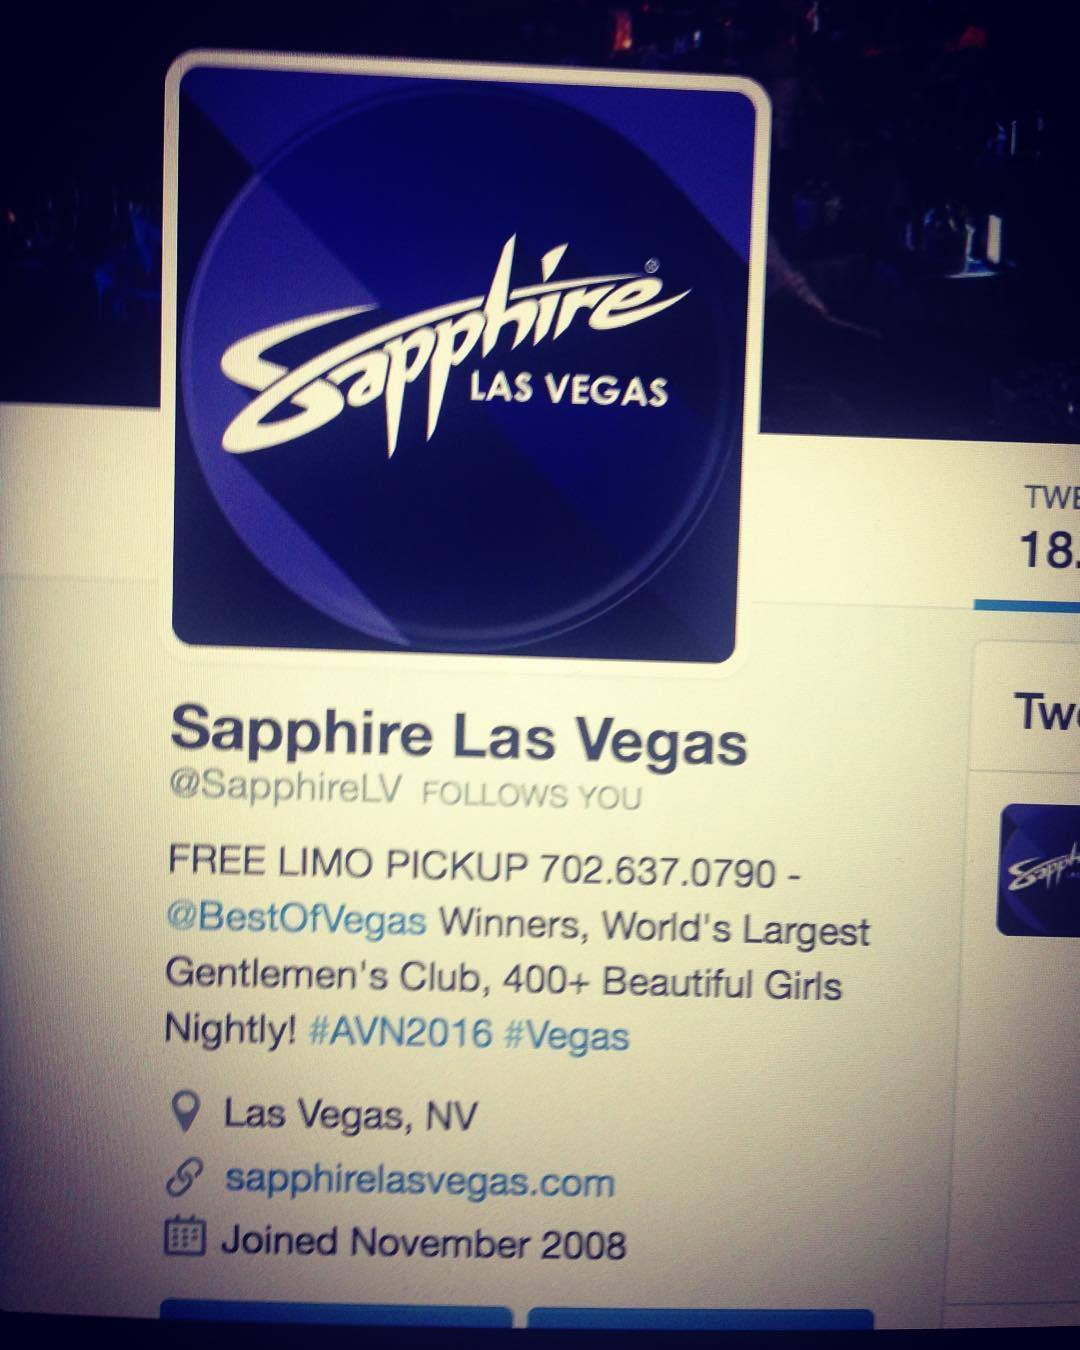 Next weekend. @sapphirelv dancing one show Saturday. Hosting Sunday for Super Bowl.